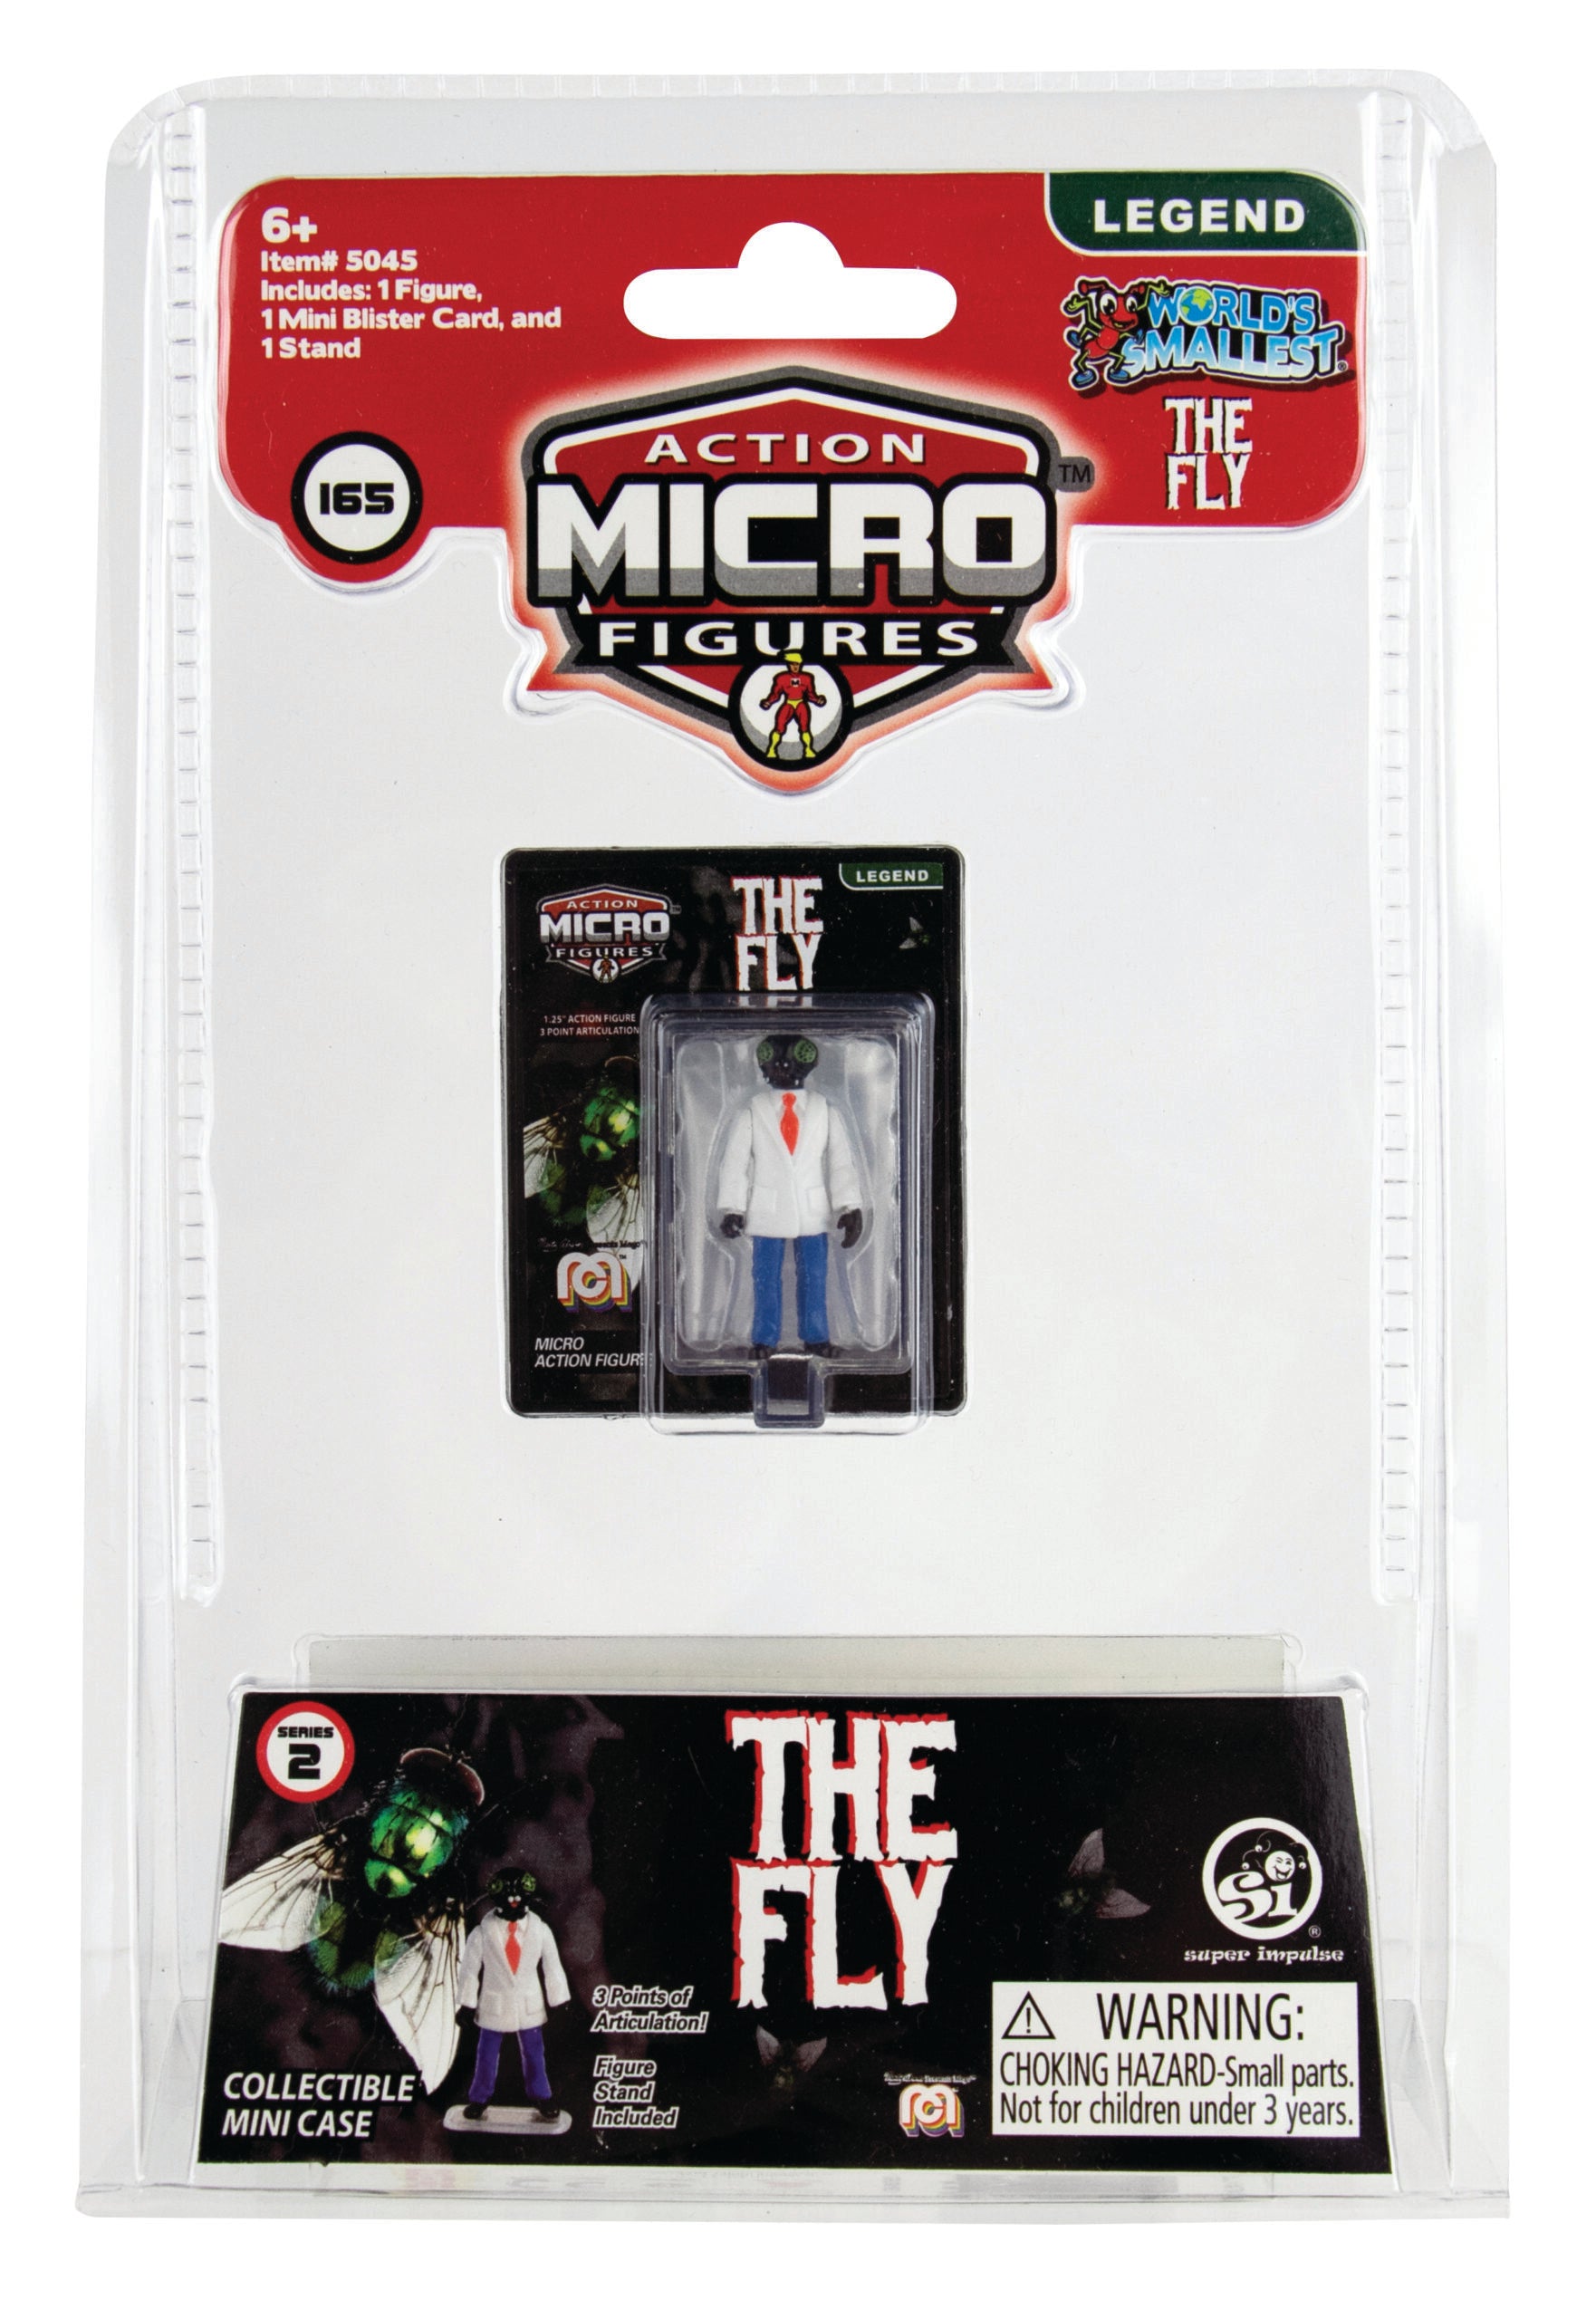 World's Smallest MEGO Series 2 Horror Set of 3 Micro Action Figures